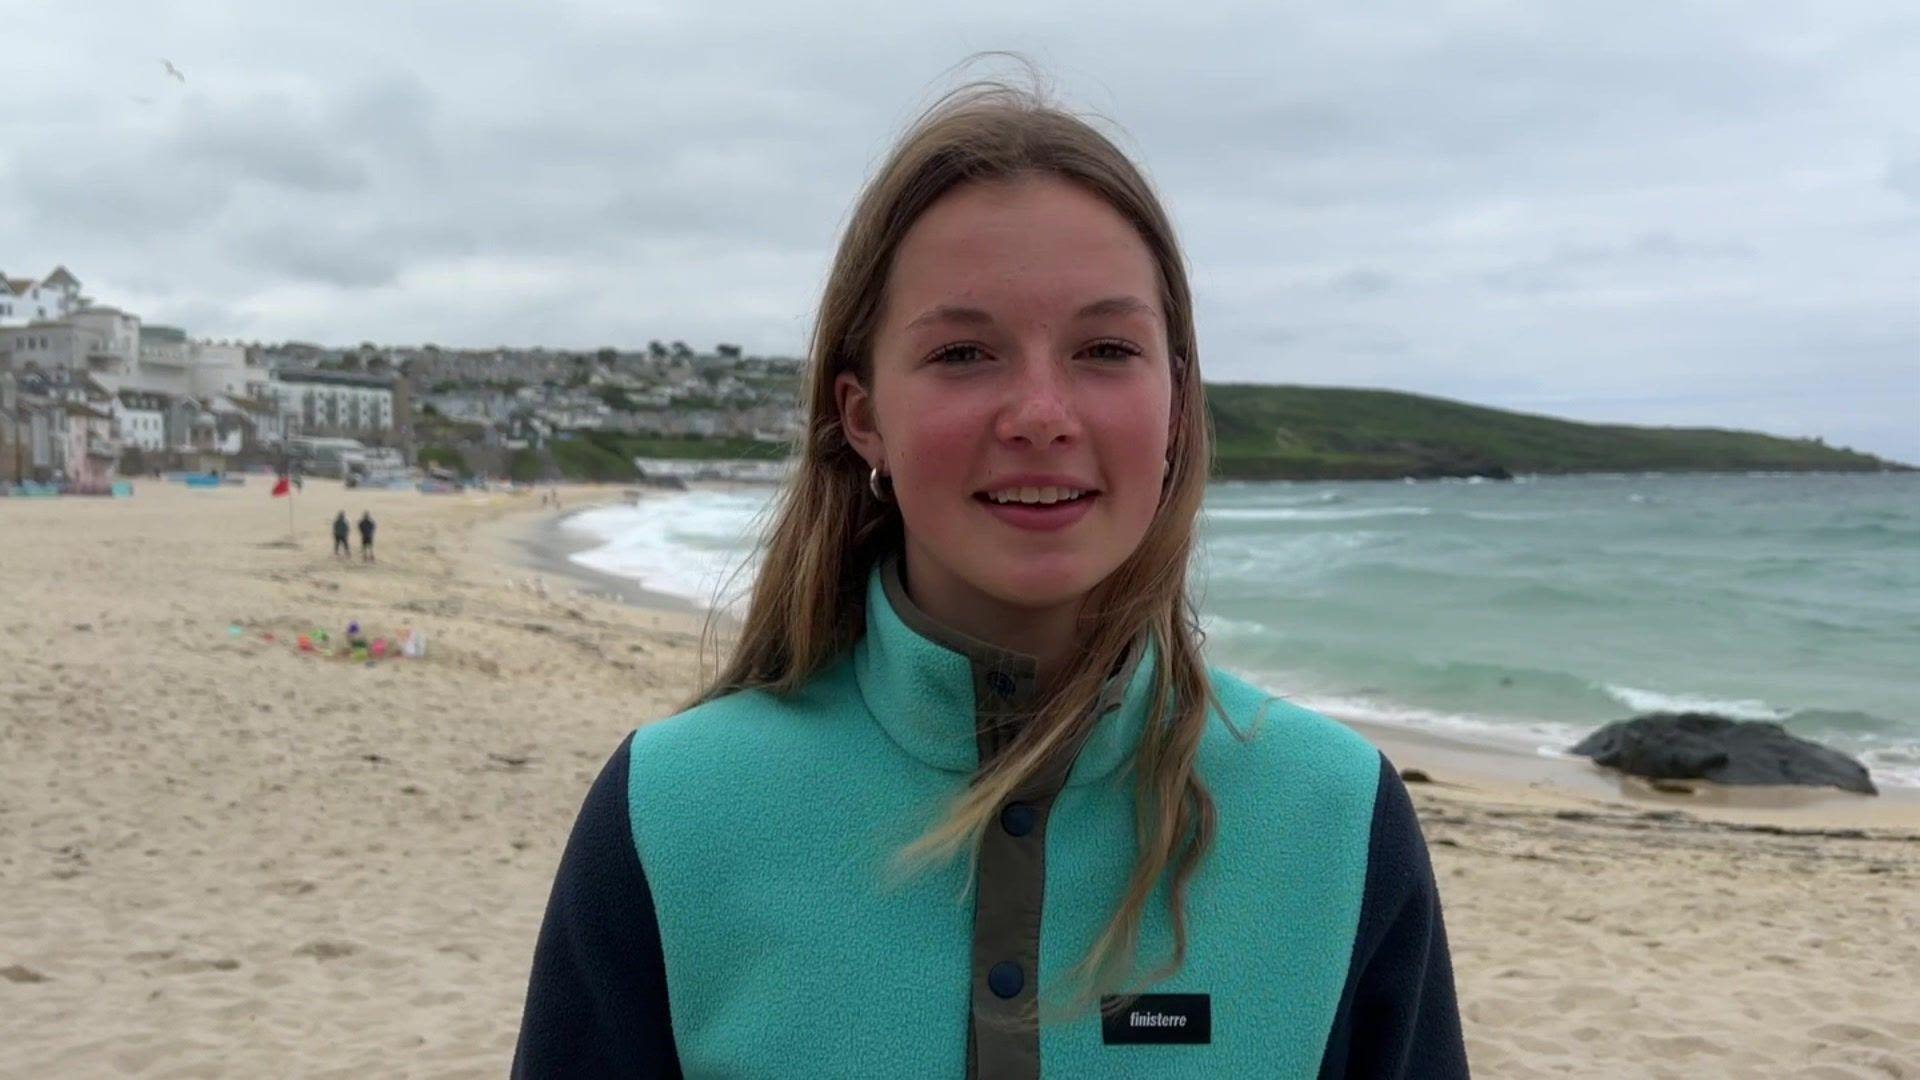 Teenager praised for 'scary' beach rescue